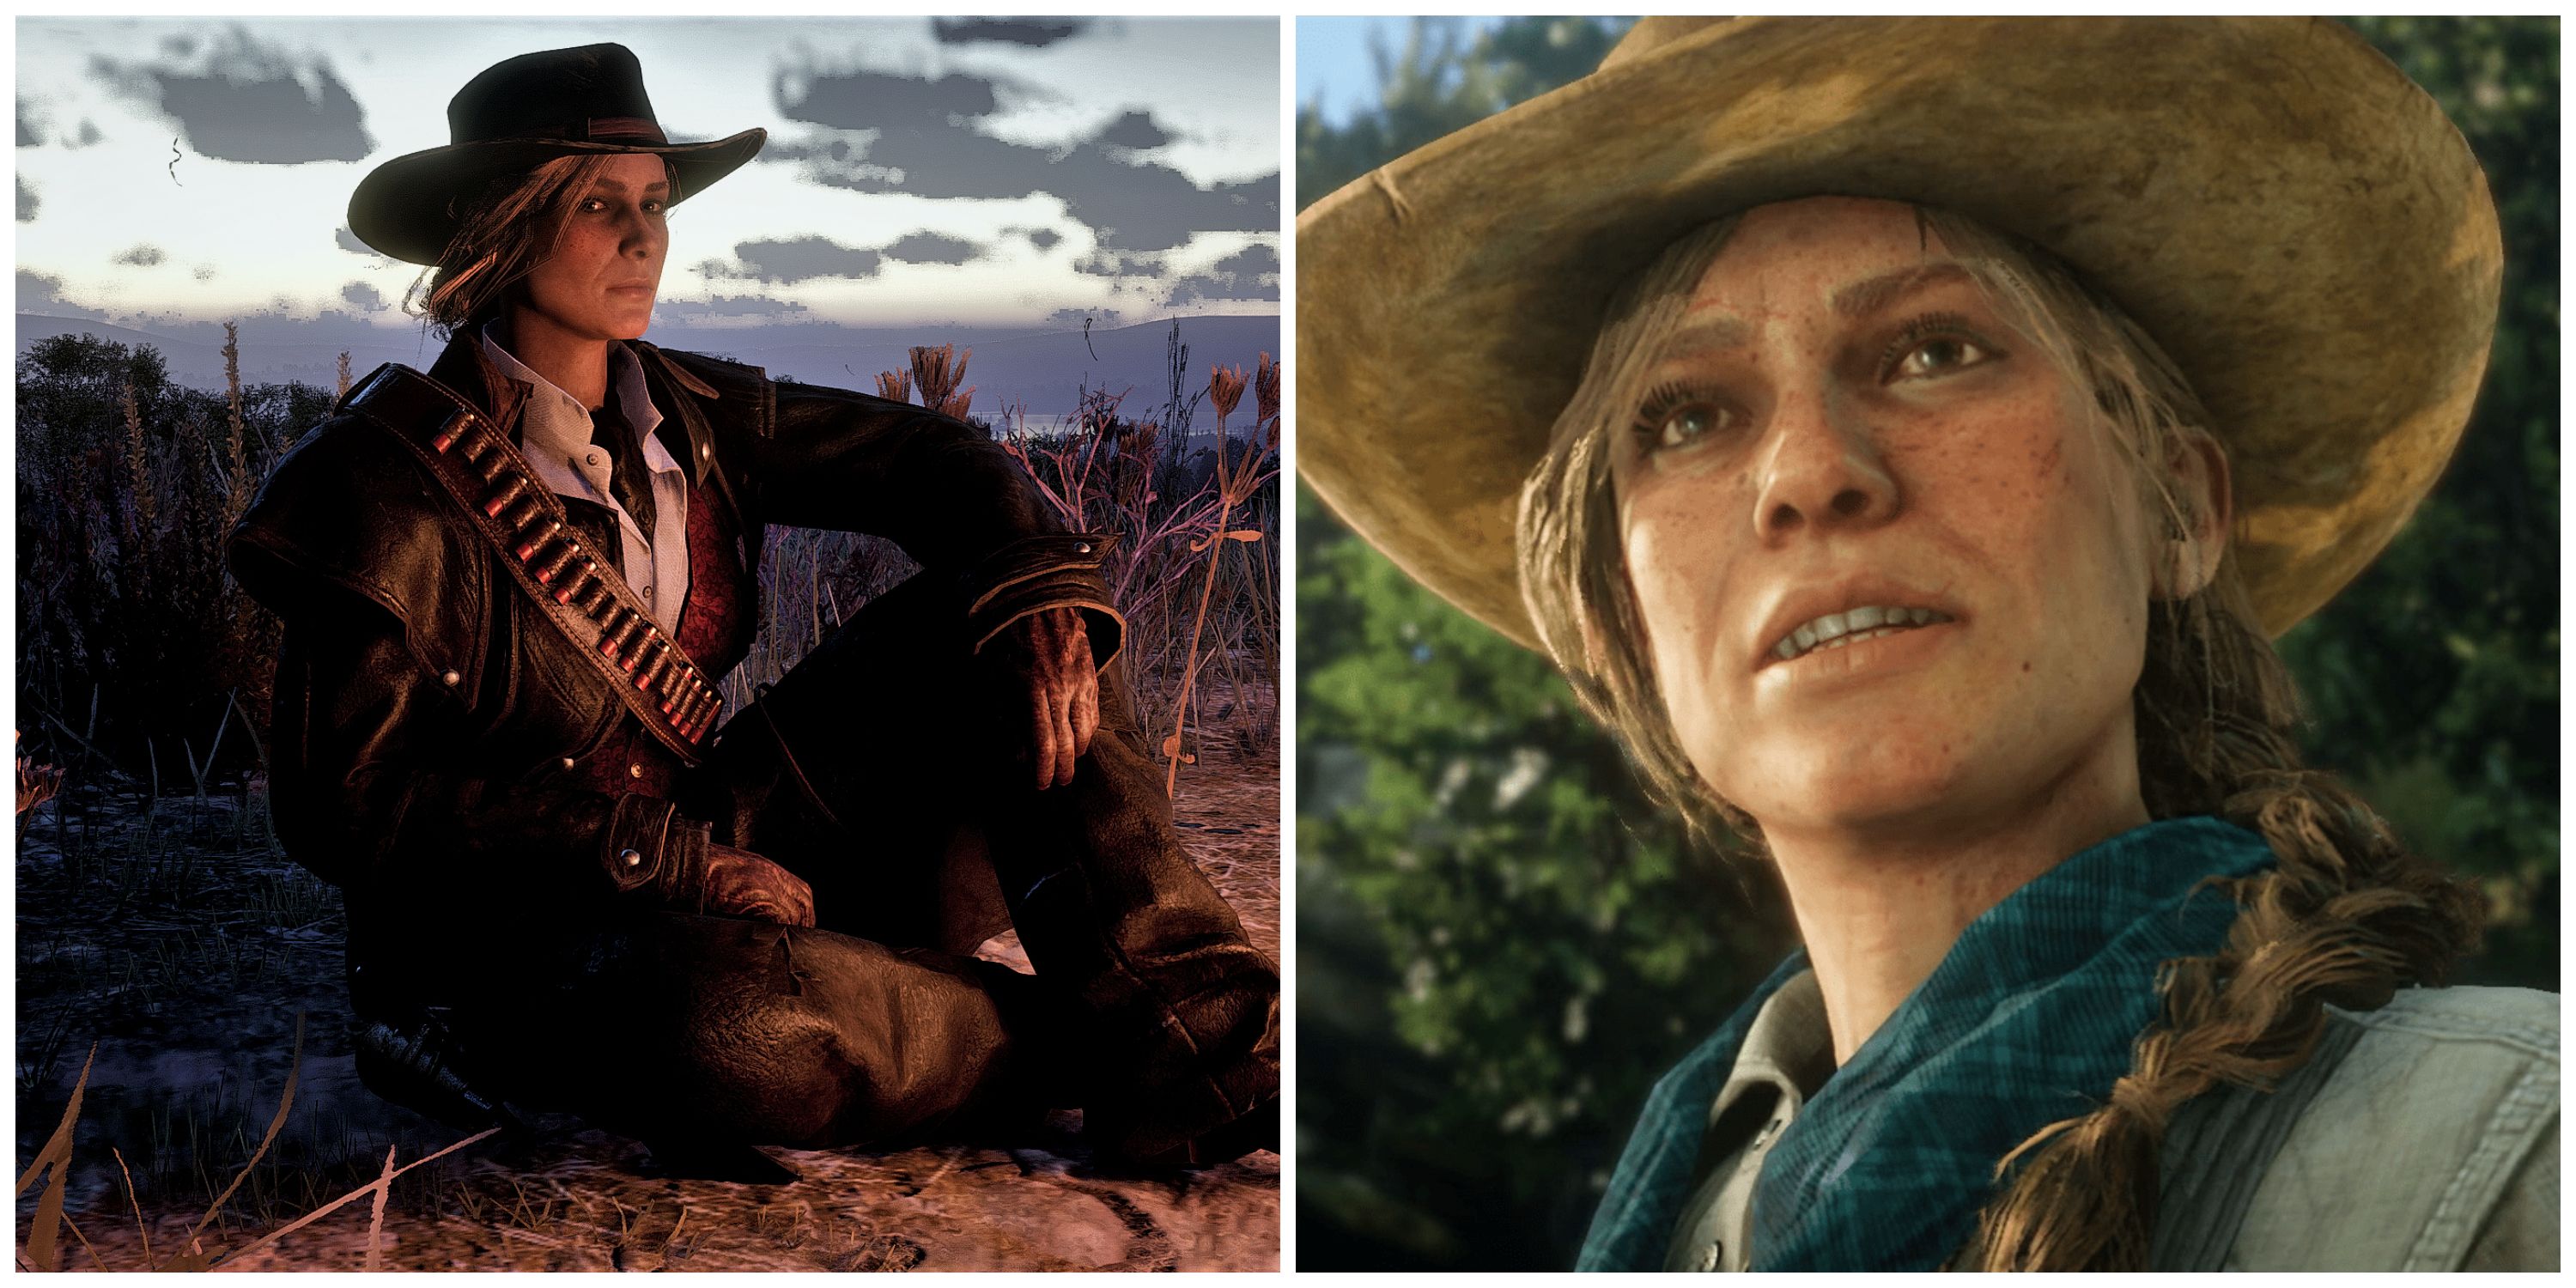 Red Dead Redemption 2: The Most Powerful Quotes By Sadie Adler